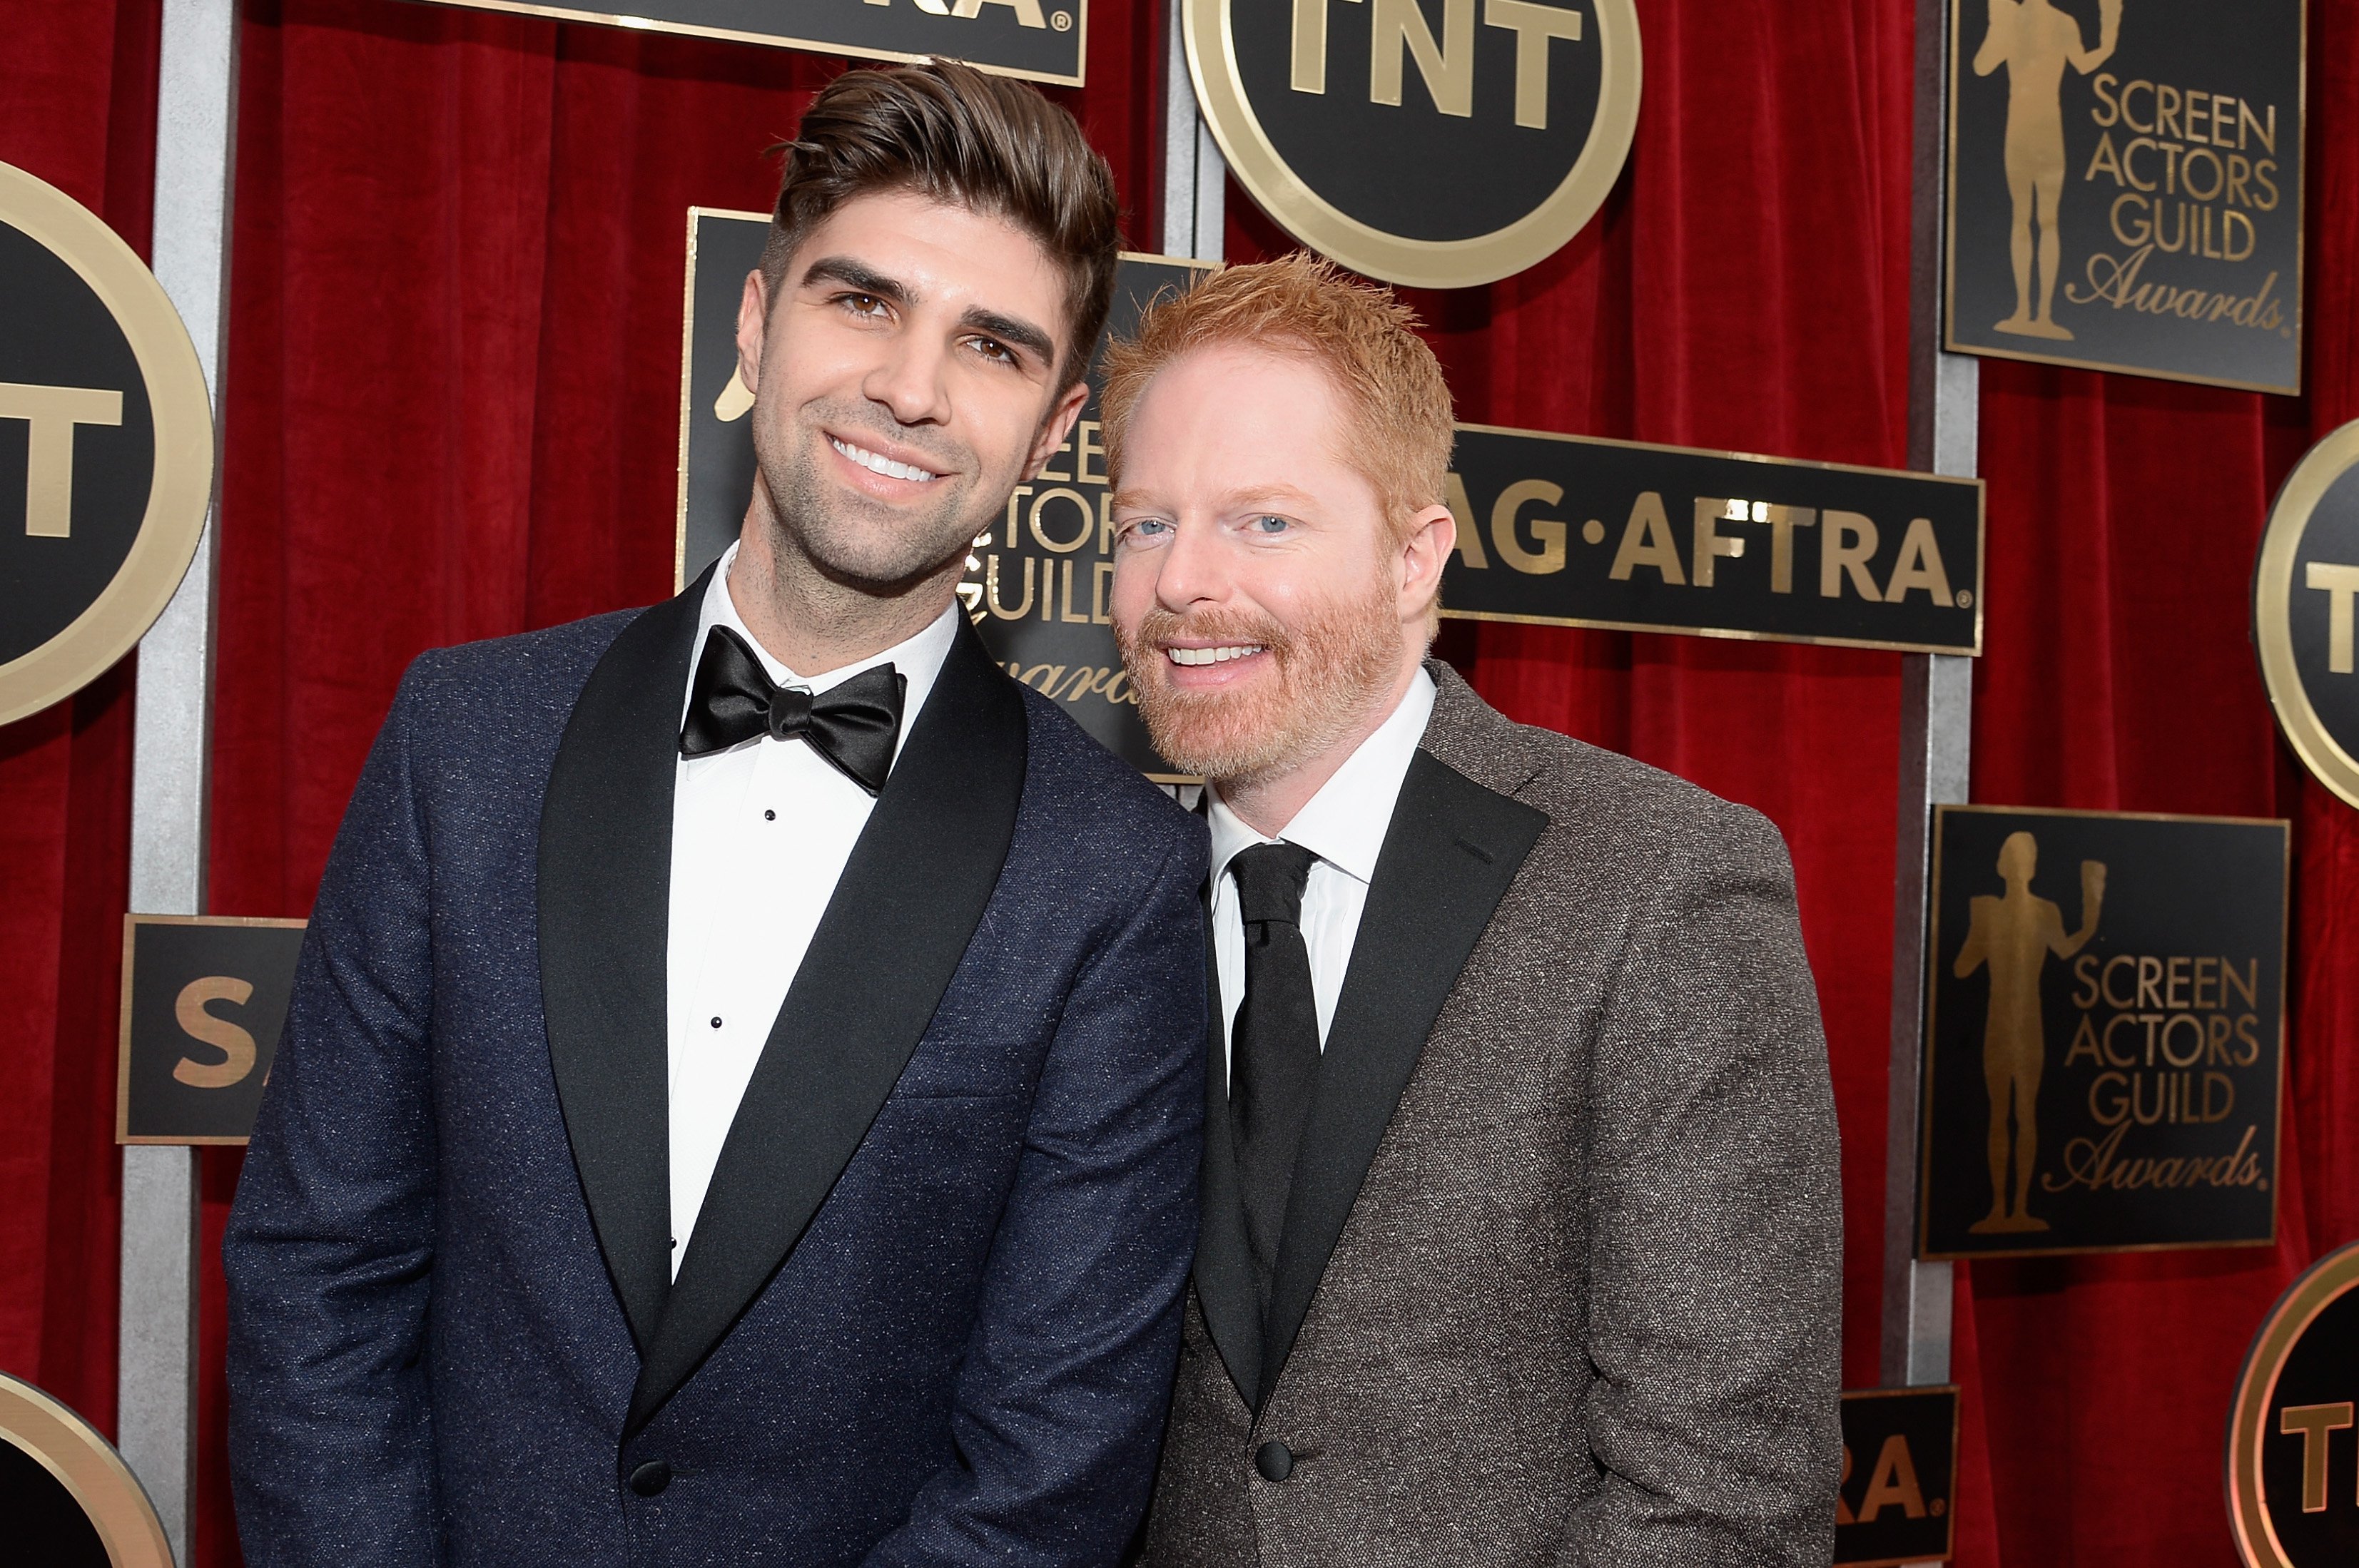  Jesse Tyler Ferguson and Justin Mikita attend the 21st Annual Screen Actors Guild Awards on January 25, 2015 in Los Angeles, California. | Photo: Getty Images